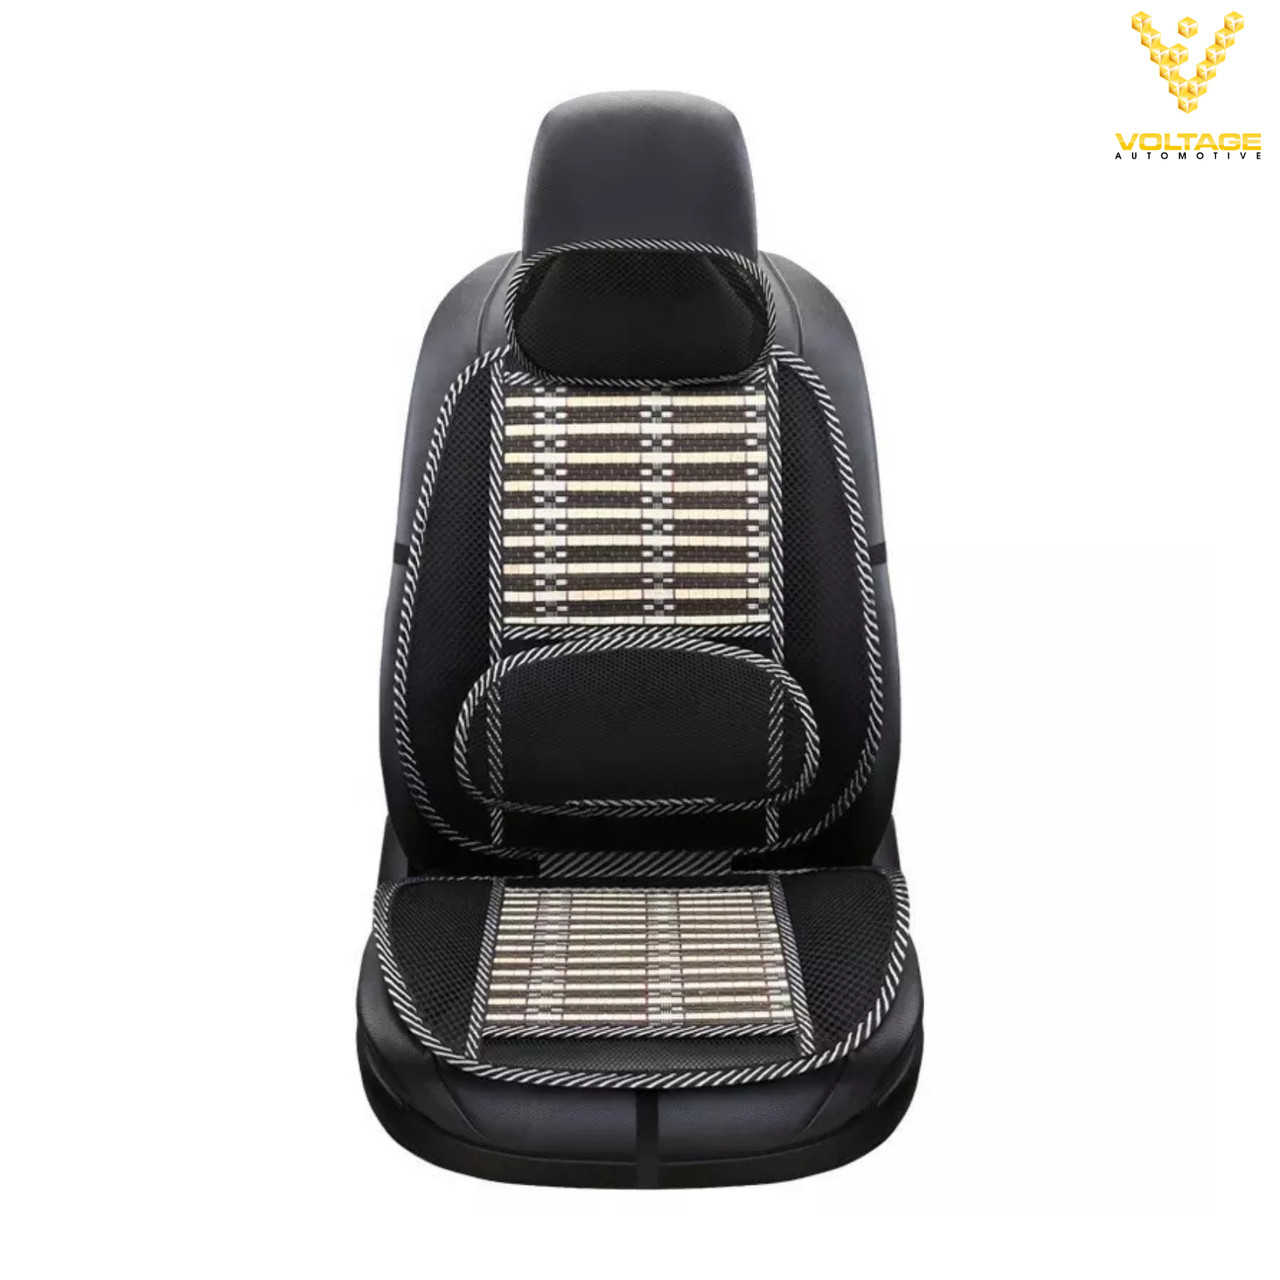 Car Universal Seat Cushion Summer Ice Silk Breathable Bamboo Silk Waist Support - Voltage Automotive BSC-02